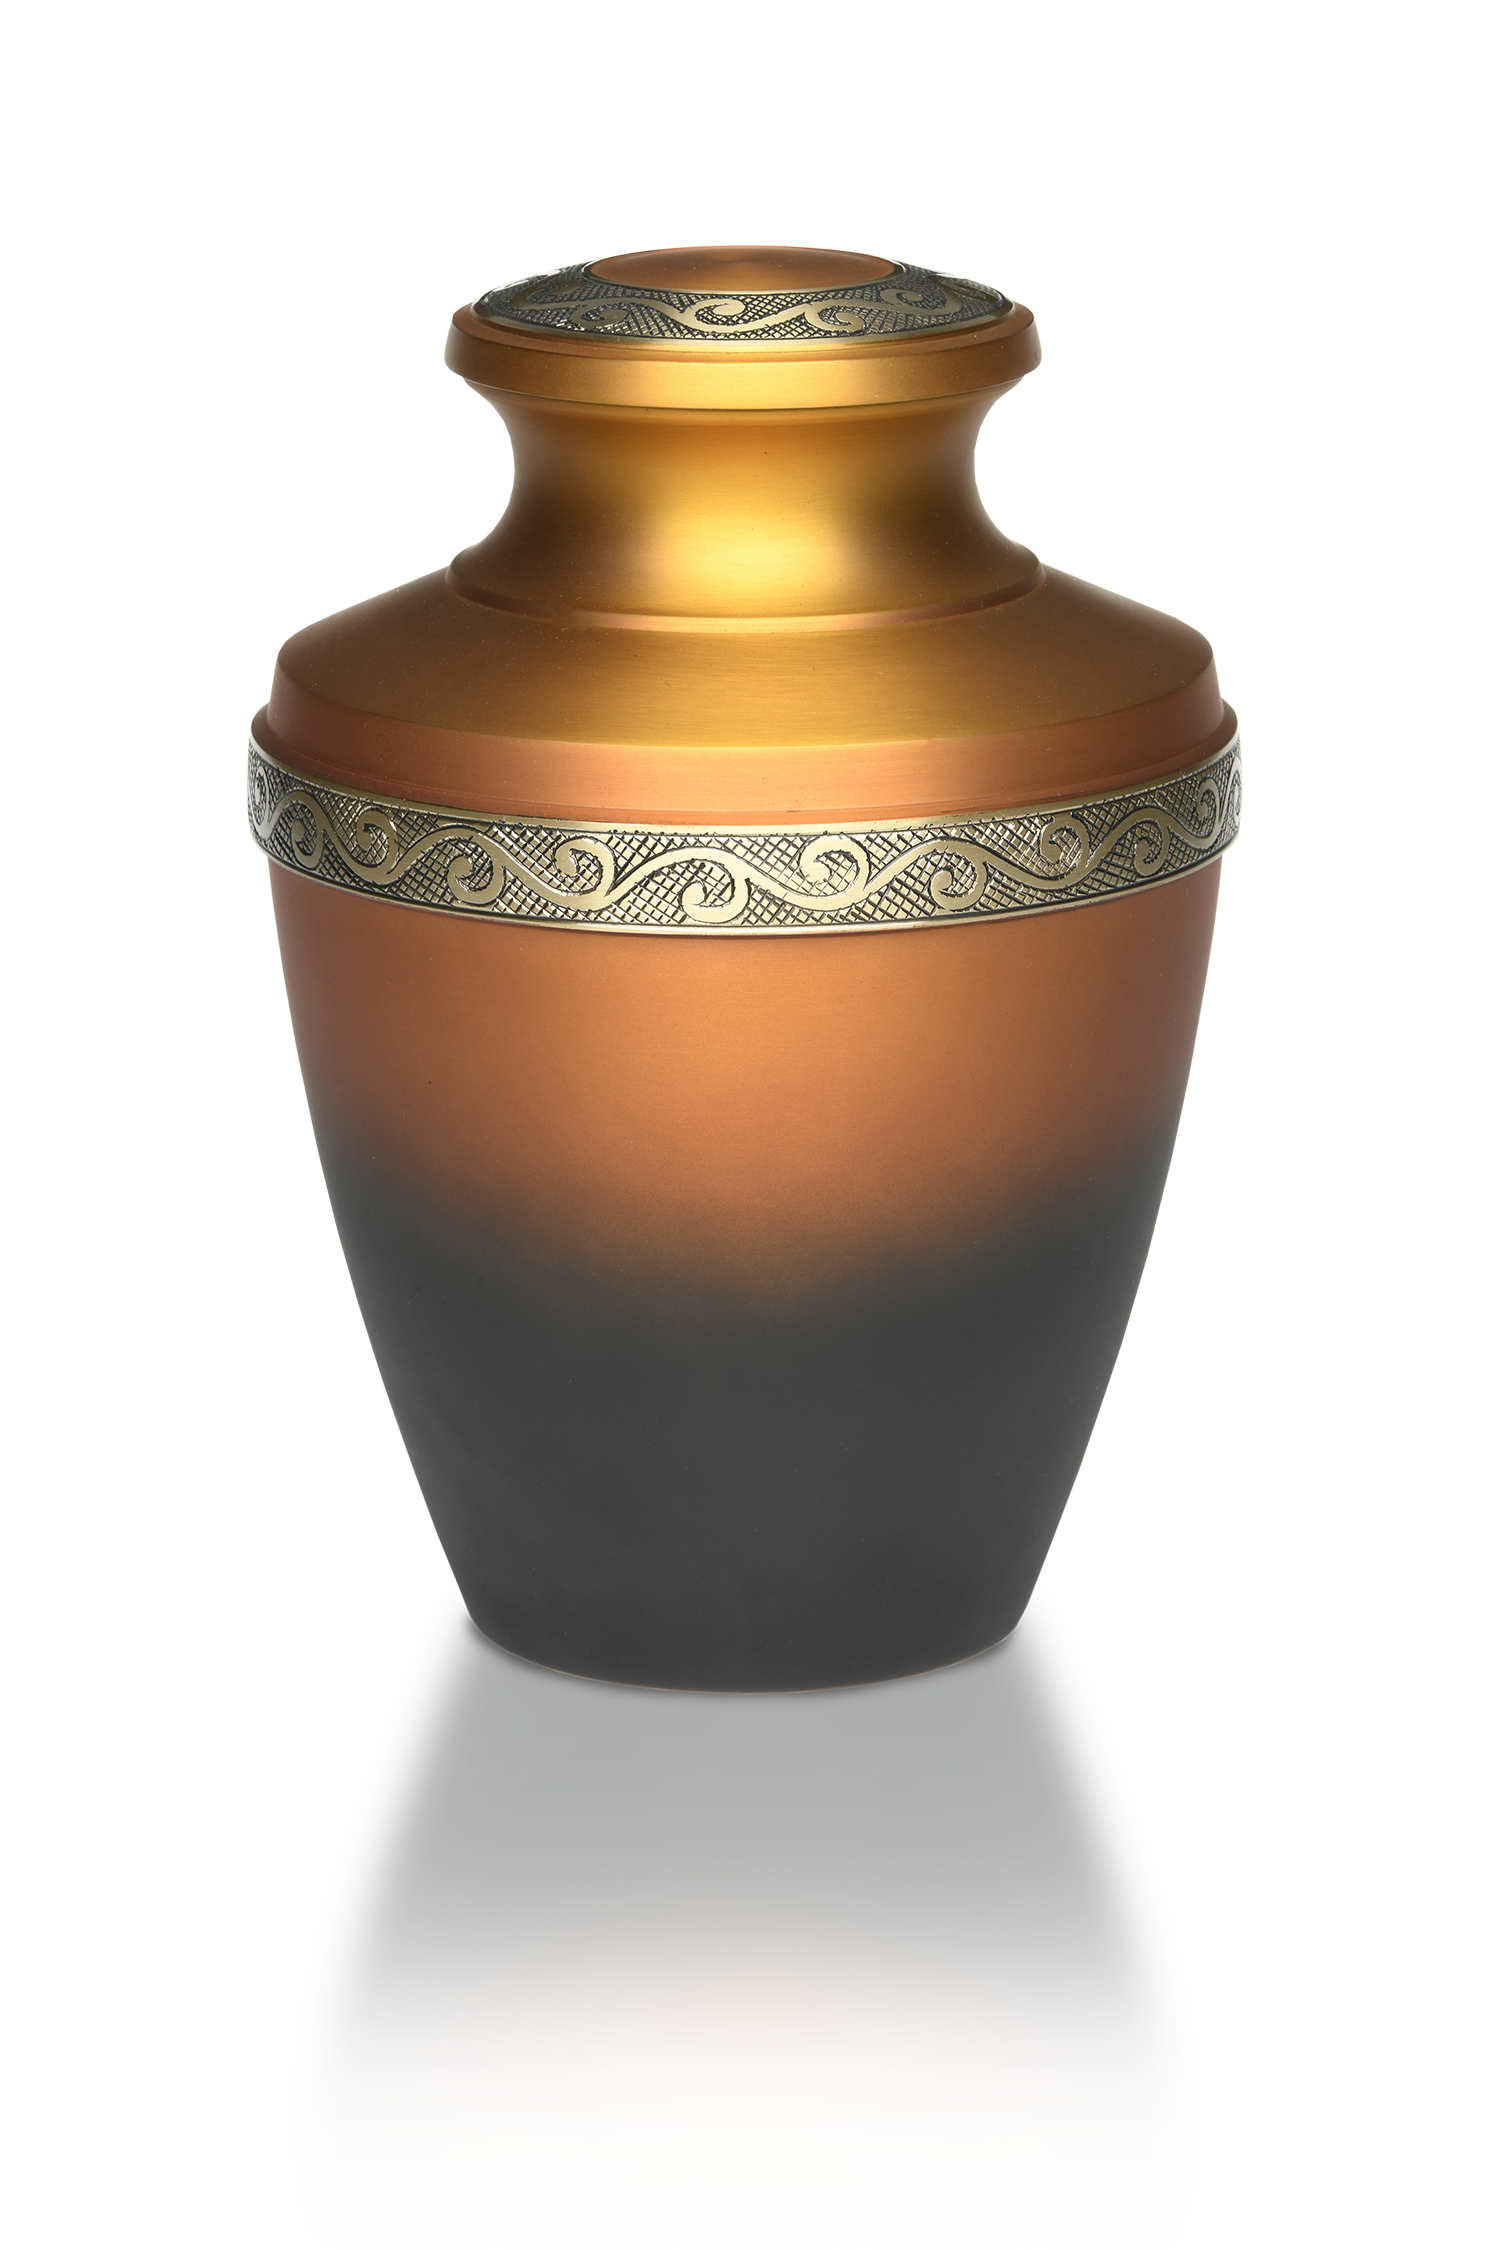 Cremation Urn in Orange & Gold Tones with Brass Band